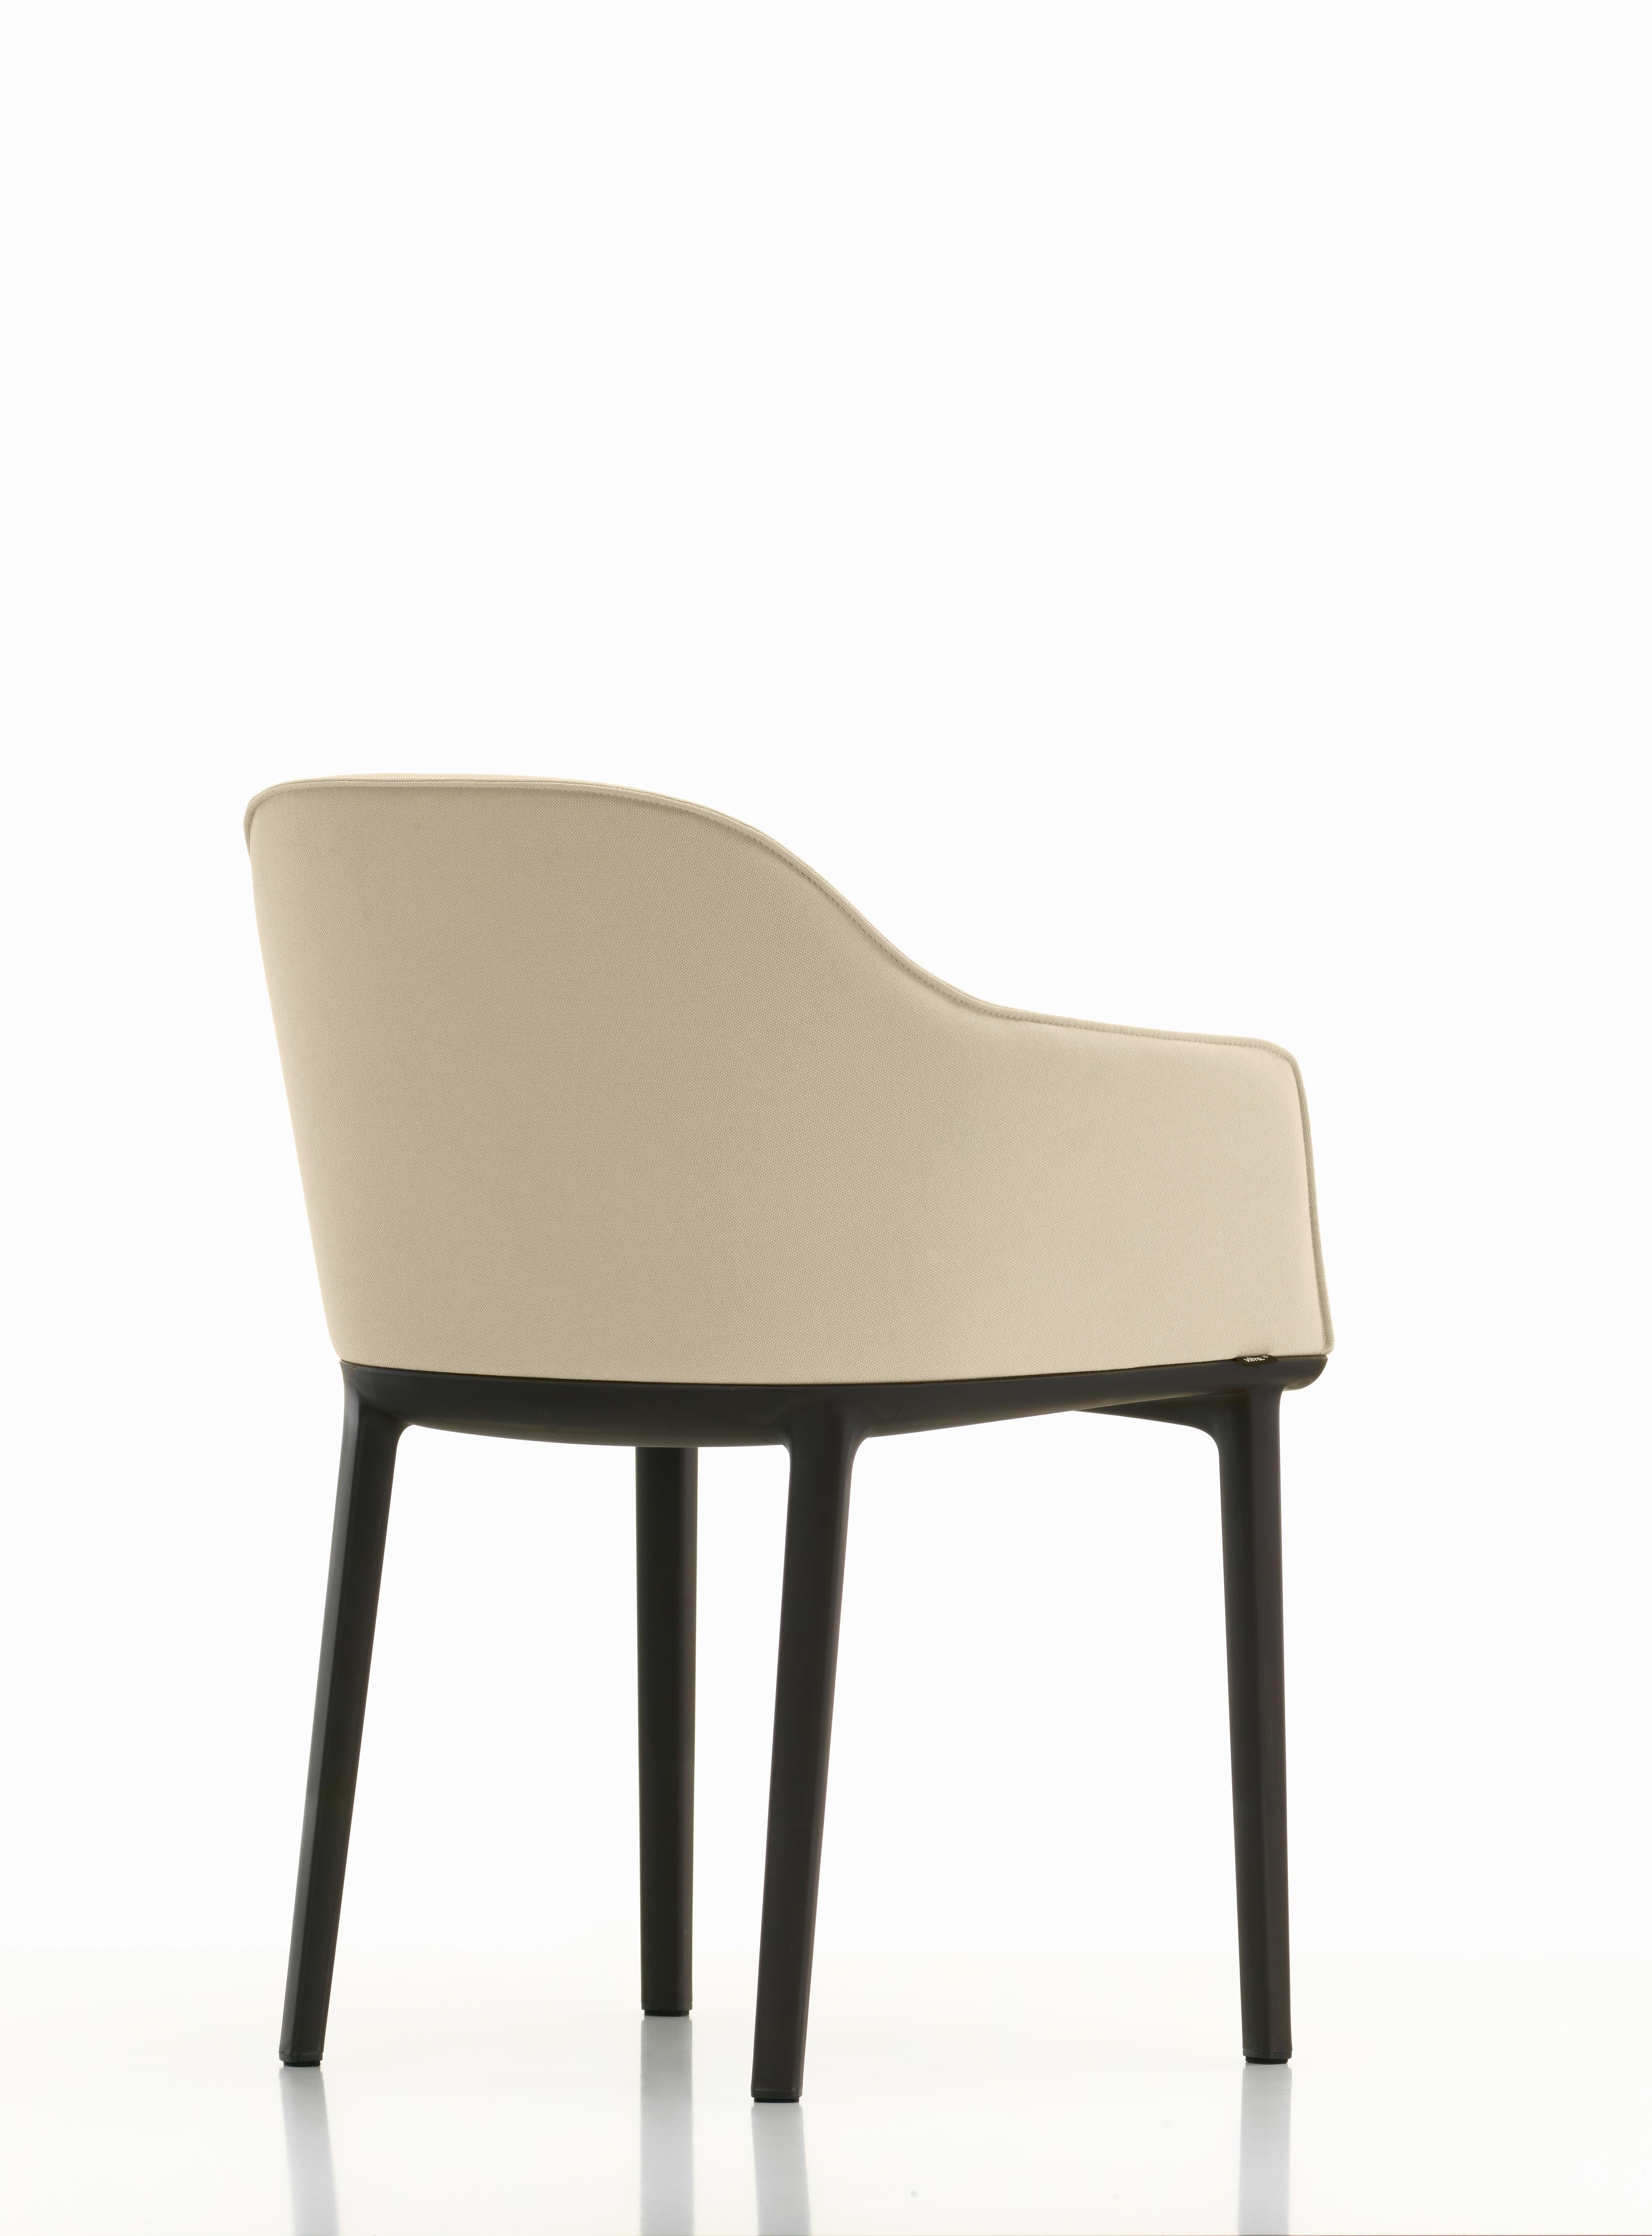 Modern Vitra Softshell Chair in Ivory Laser by Ronan & Erwan Bouroullec For Sale